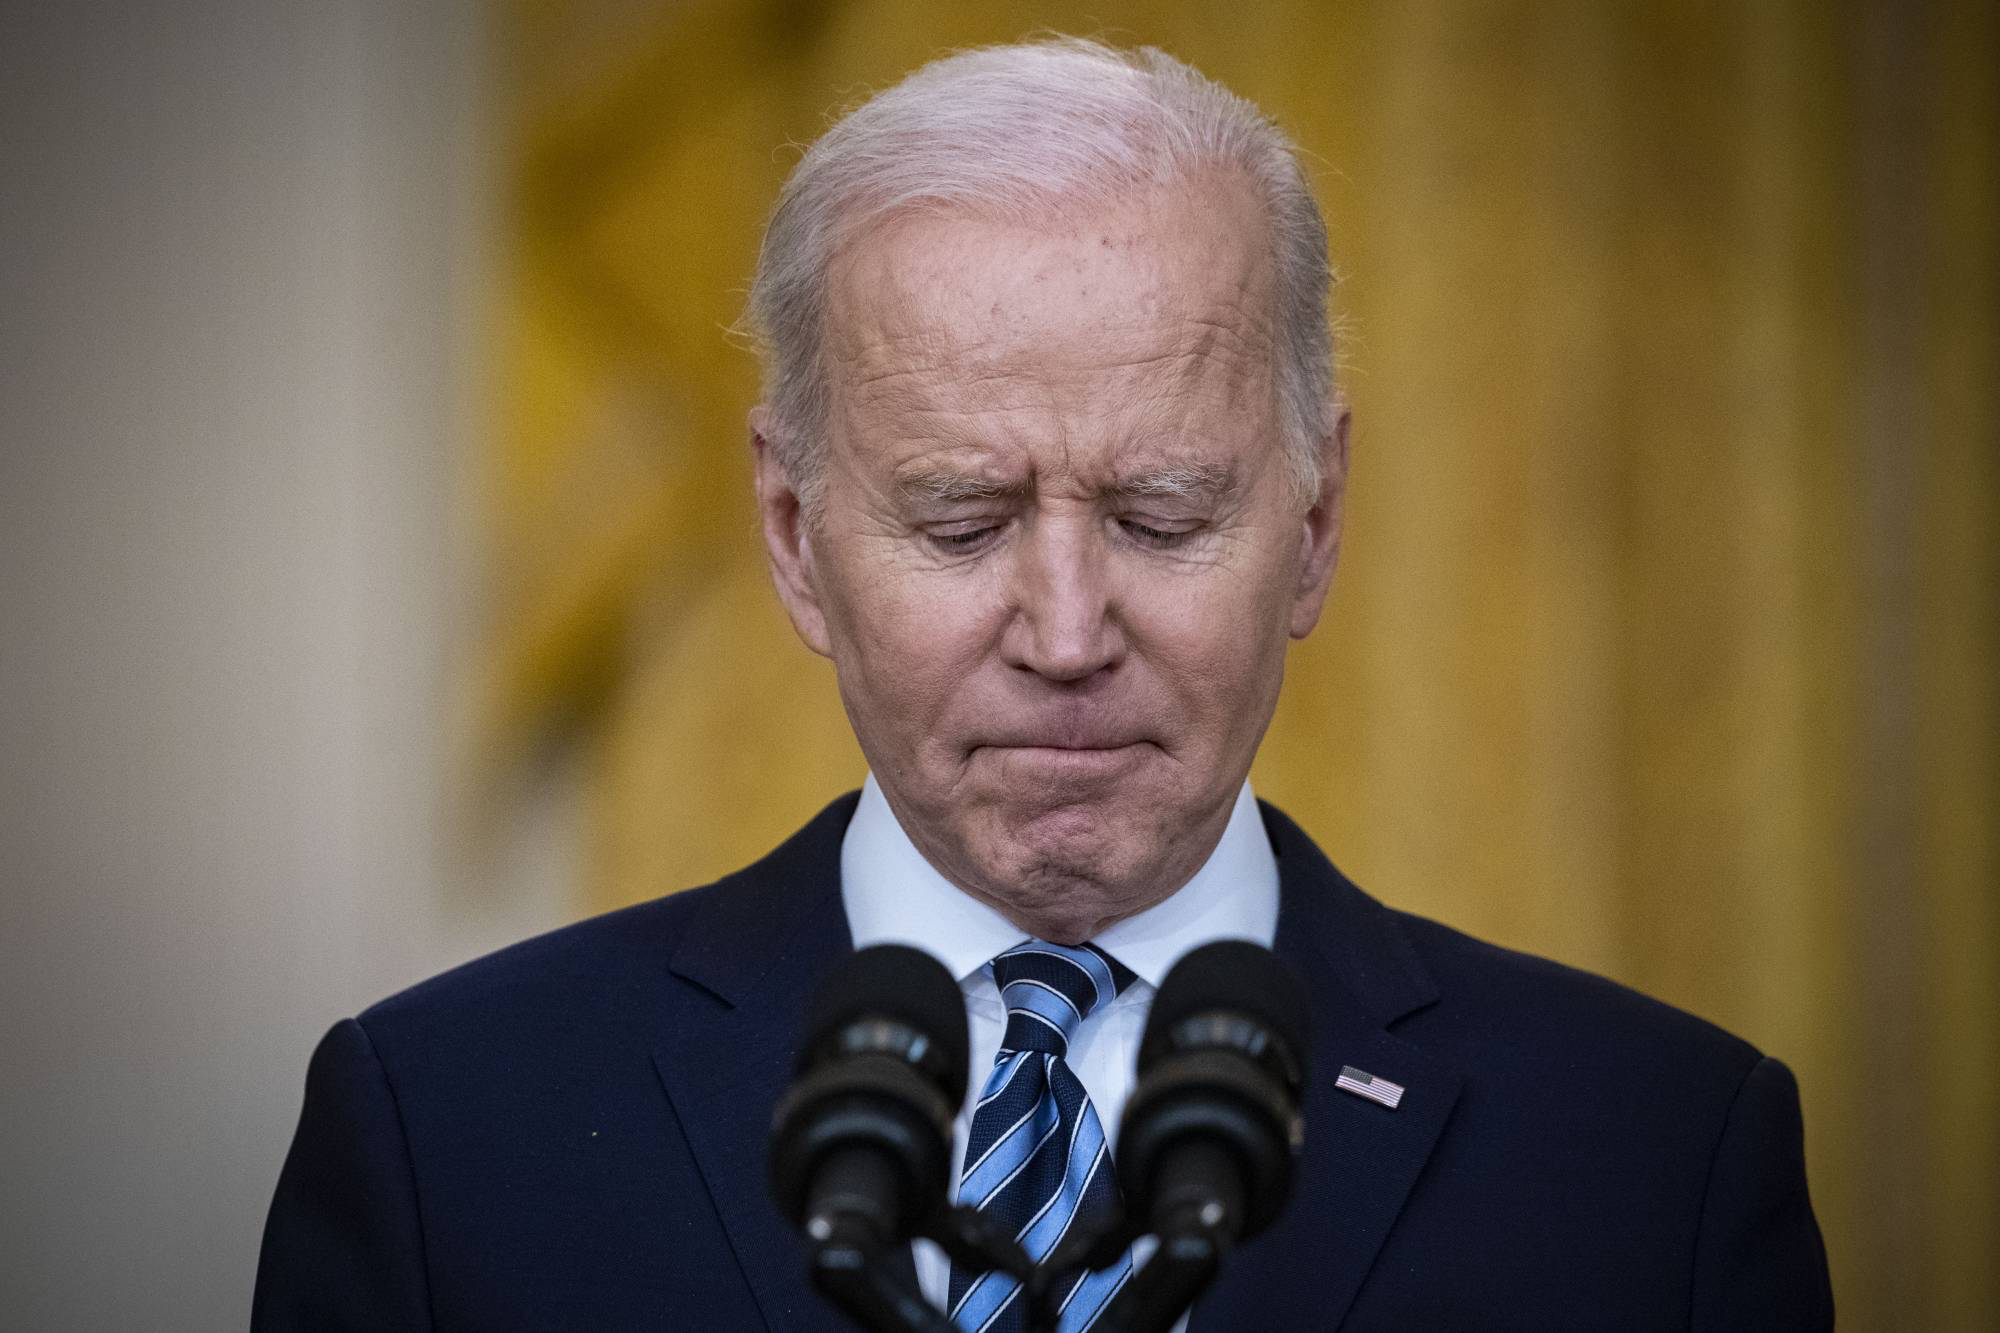 Local leaders react to Biden announcement  Post feature image